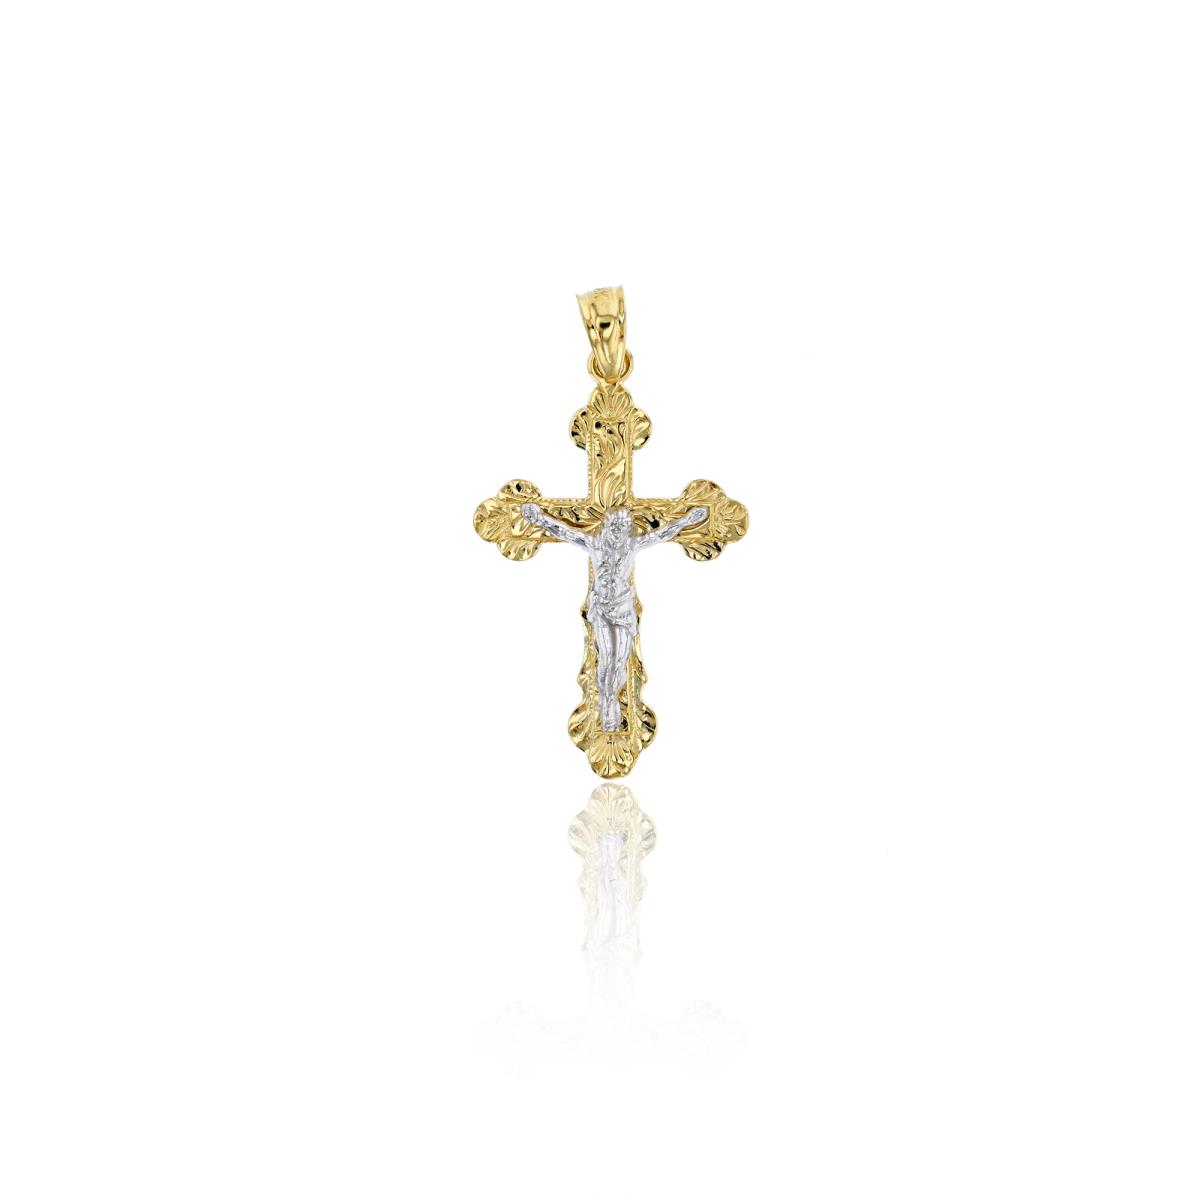 14K Two-Tone Gold Polished & Textured Religious Antique Crucifix Cross Pendant